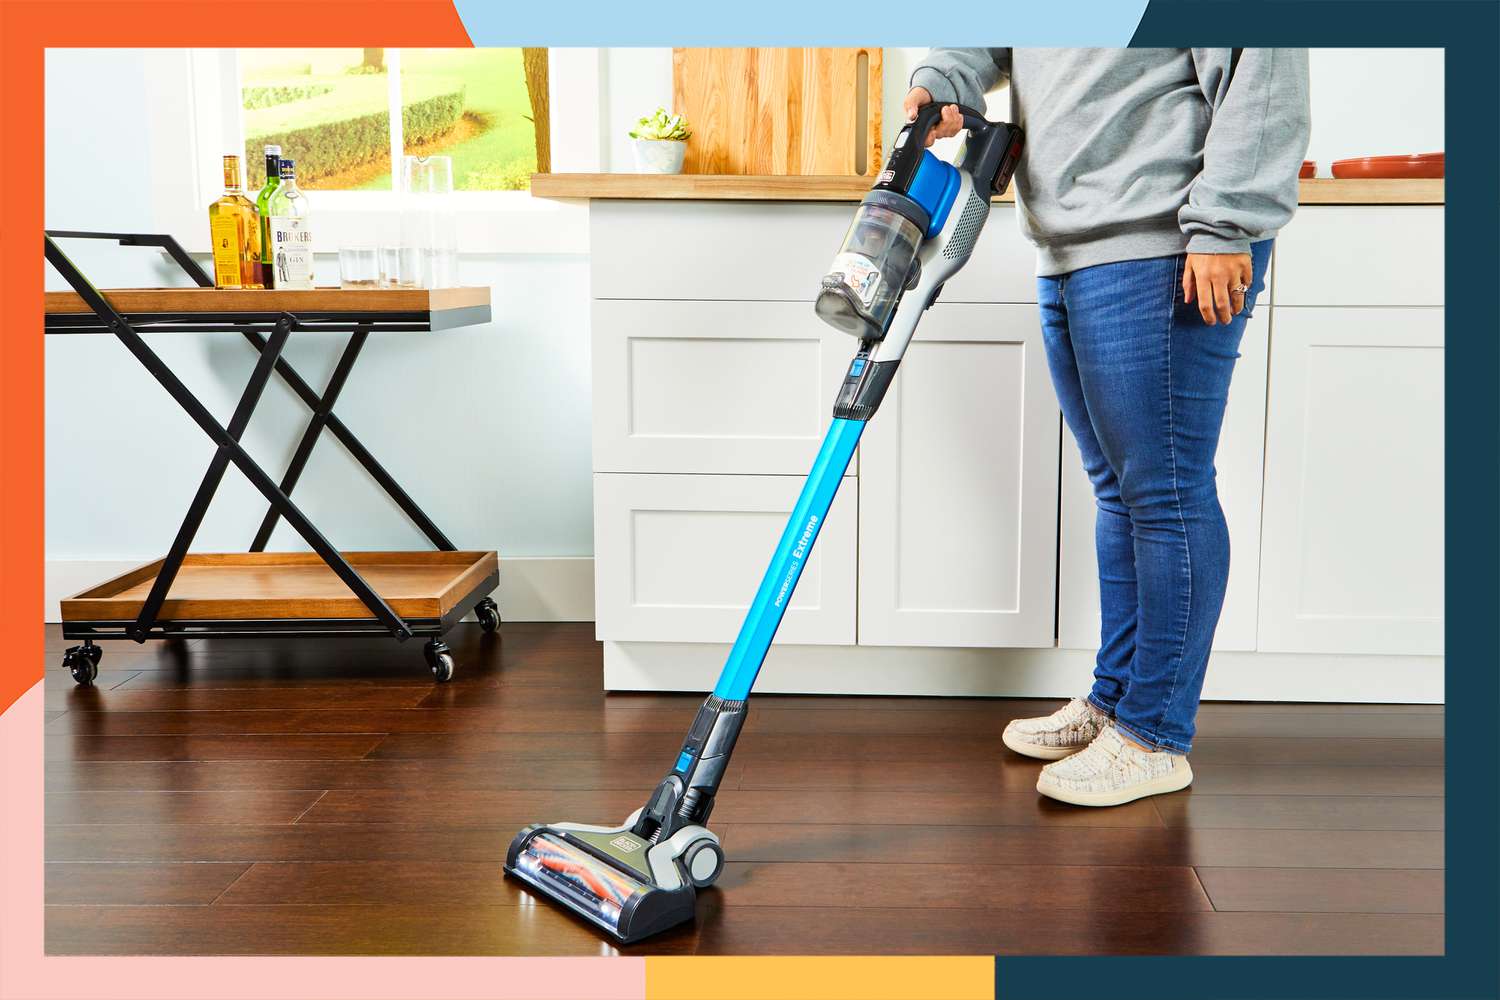 Person vacuuming kitchen floor with the Black + Decker Powerseries Extreme Cordless Stick Vacuum